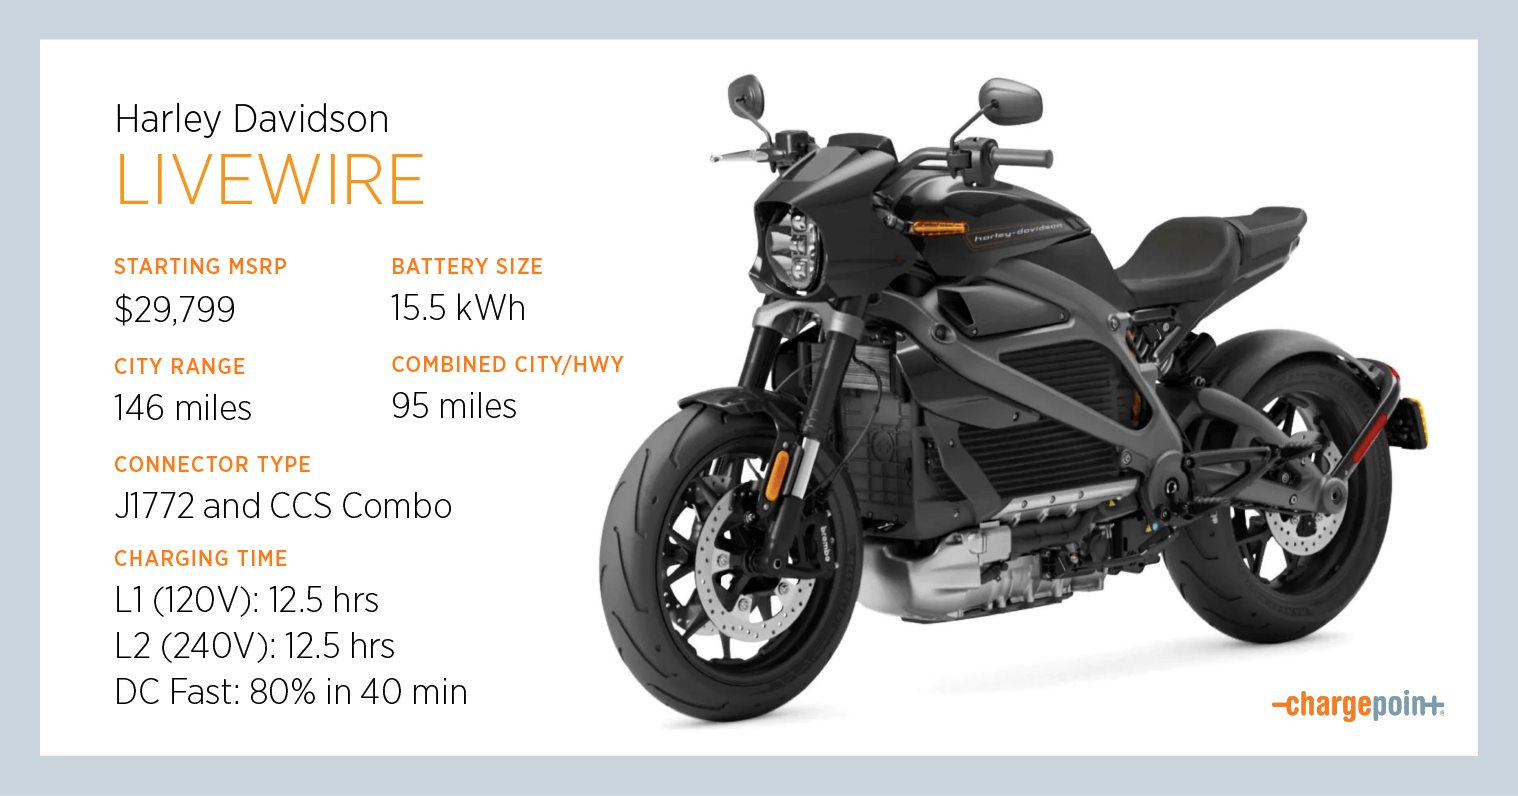 https://www.chargepoint.com/sites/default/files/blog-photos/2019-10/ChargePoint-Car-Profile-Harley-Davidson-Livewire_0.png